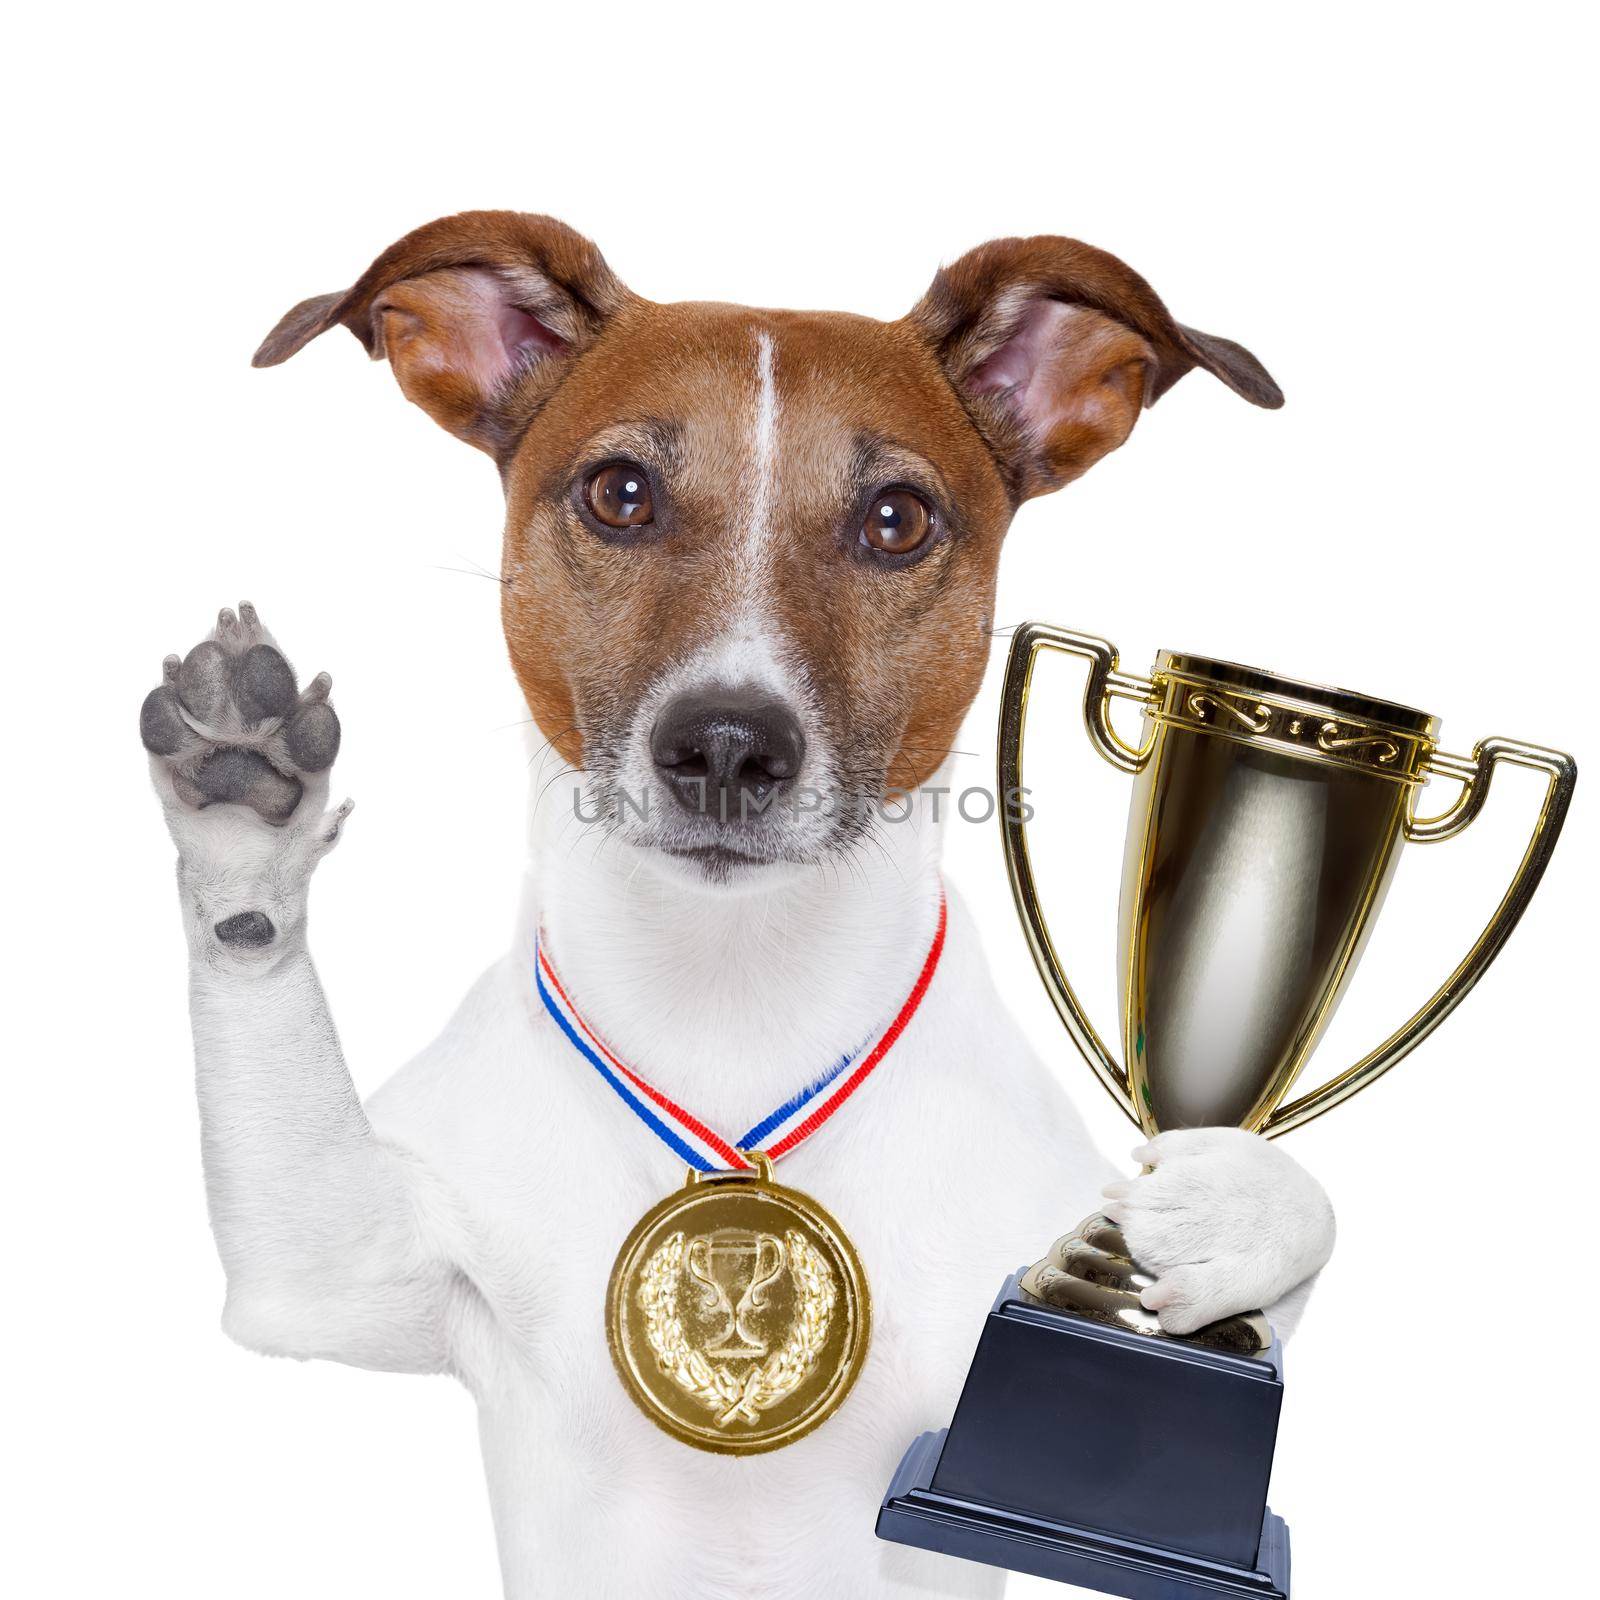 champion winning dog with a gold medal